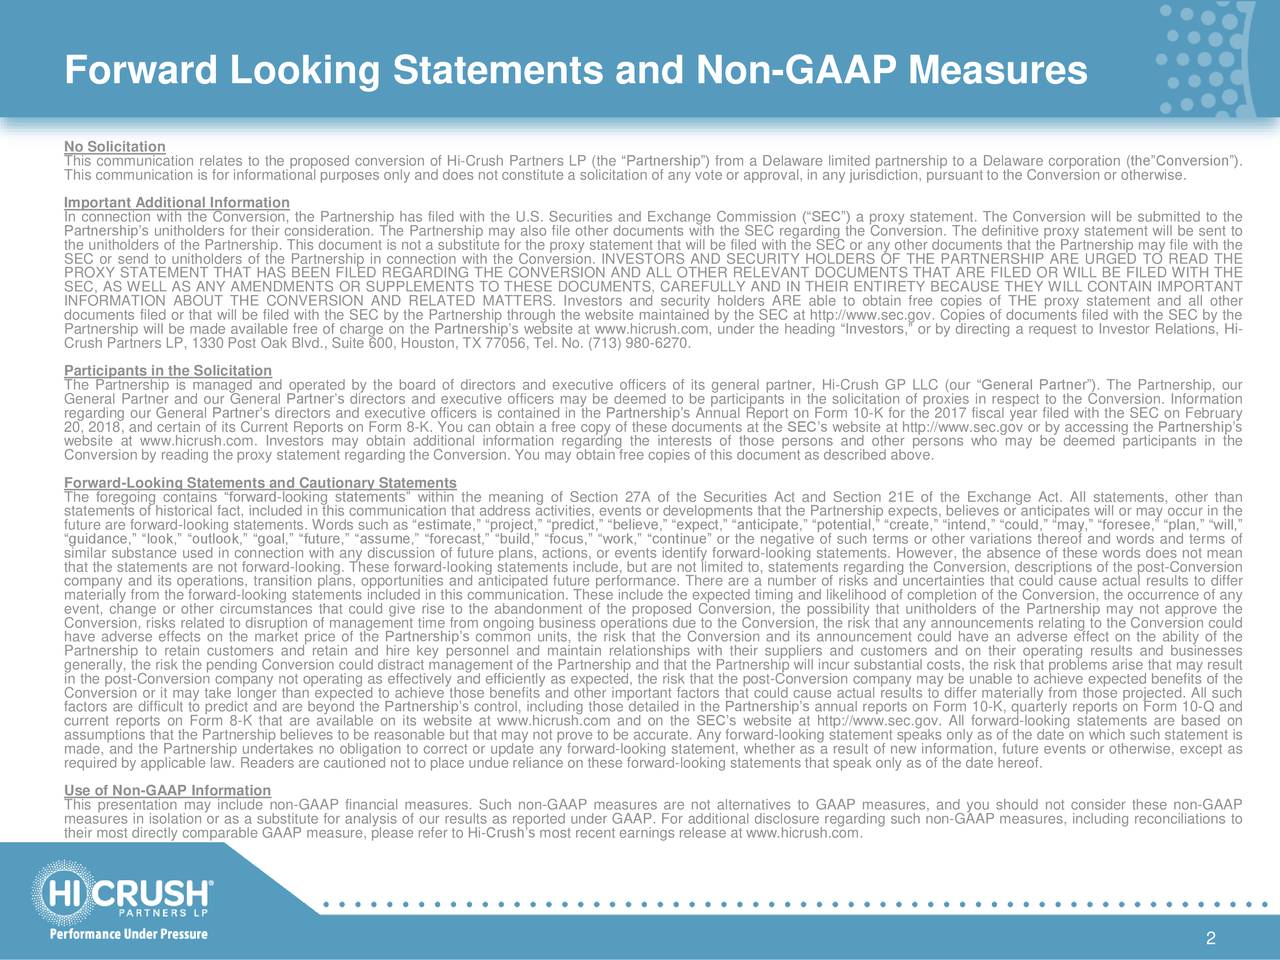 Forward Looking Statements and Non-GAAP Measures